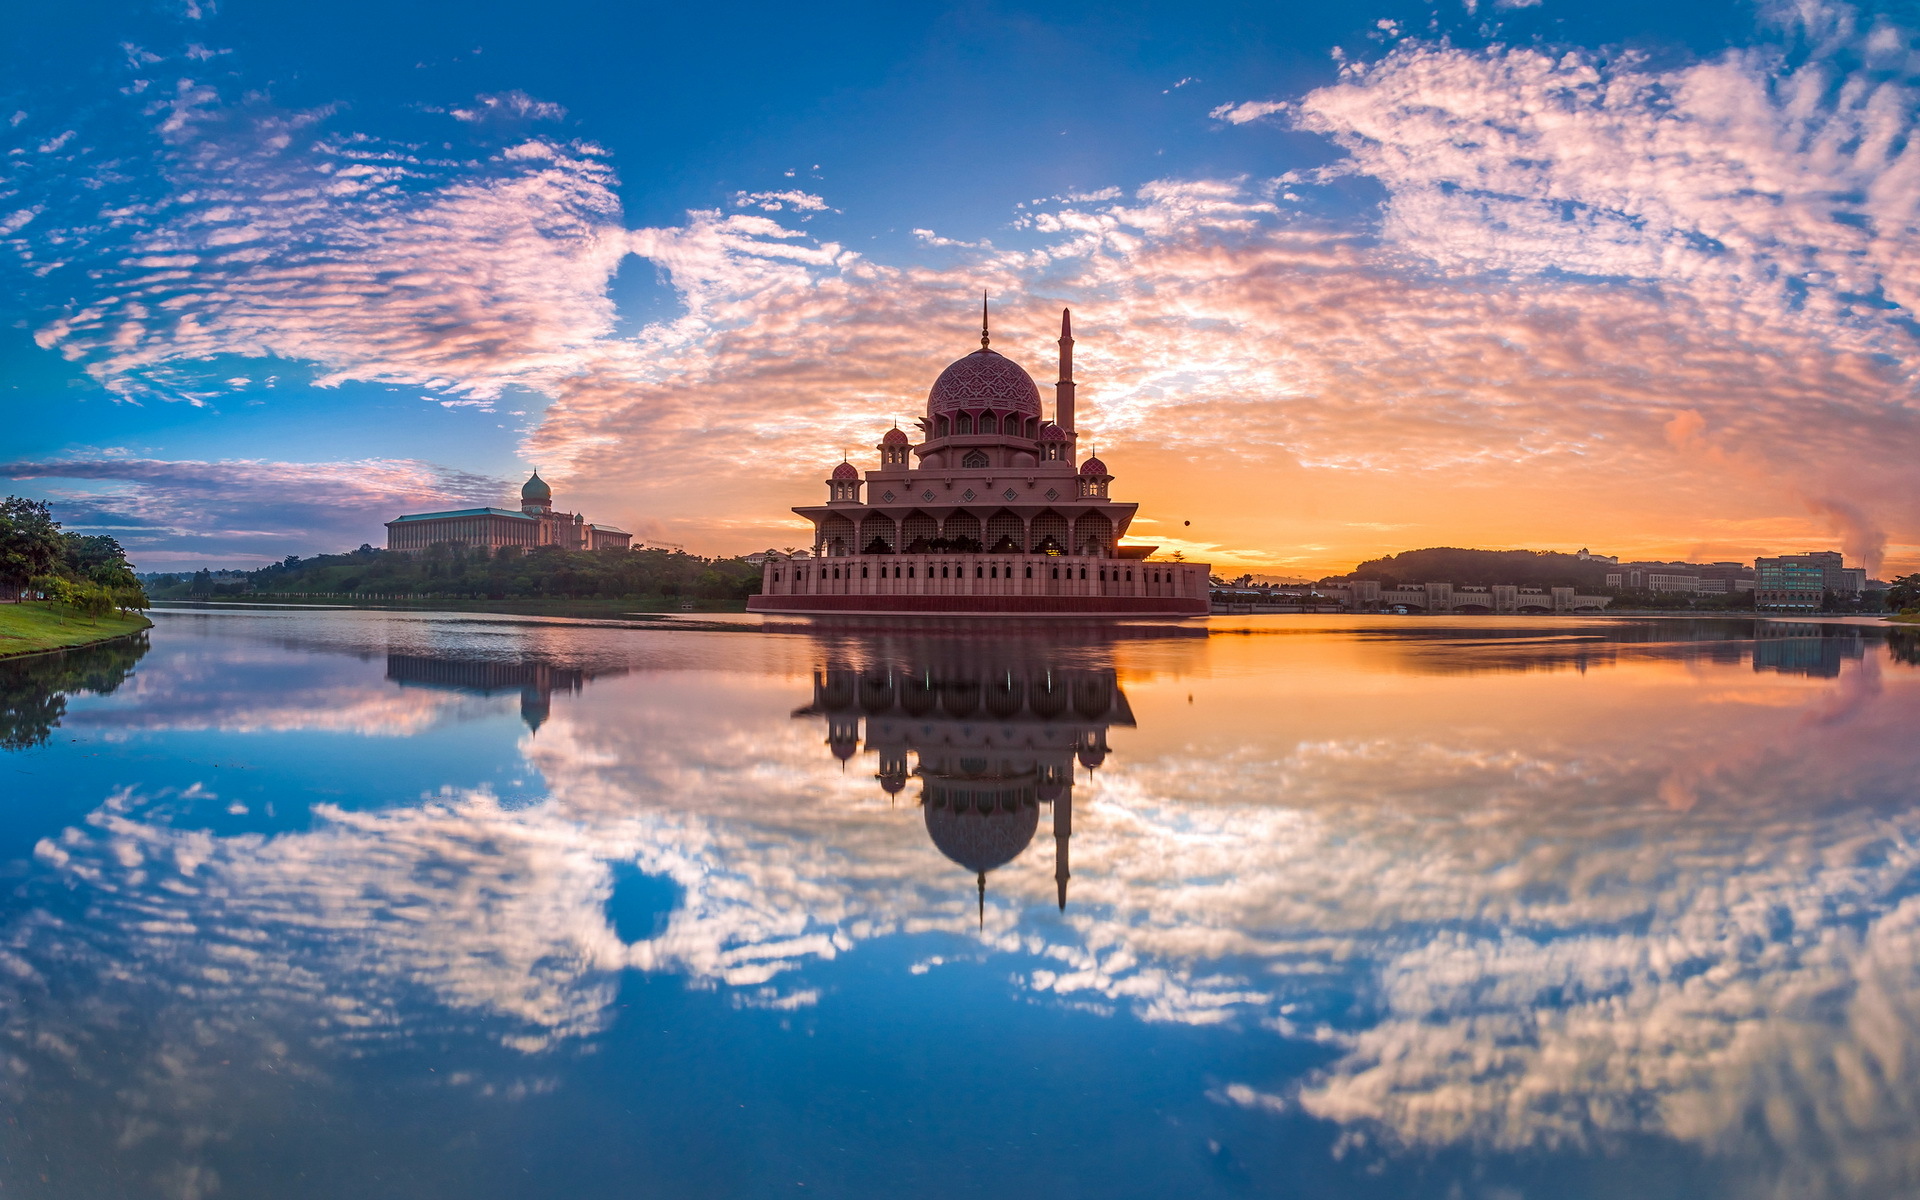 malaysia, Putrajaya, World, Architecture, Buildings, Hdr, Lakes, Rivers, Water, Reflection, Sky, Clouds, Sunrise, Sunset, Cities Wallpaper